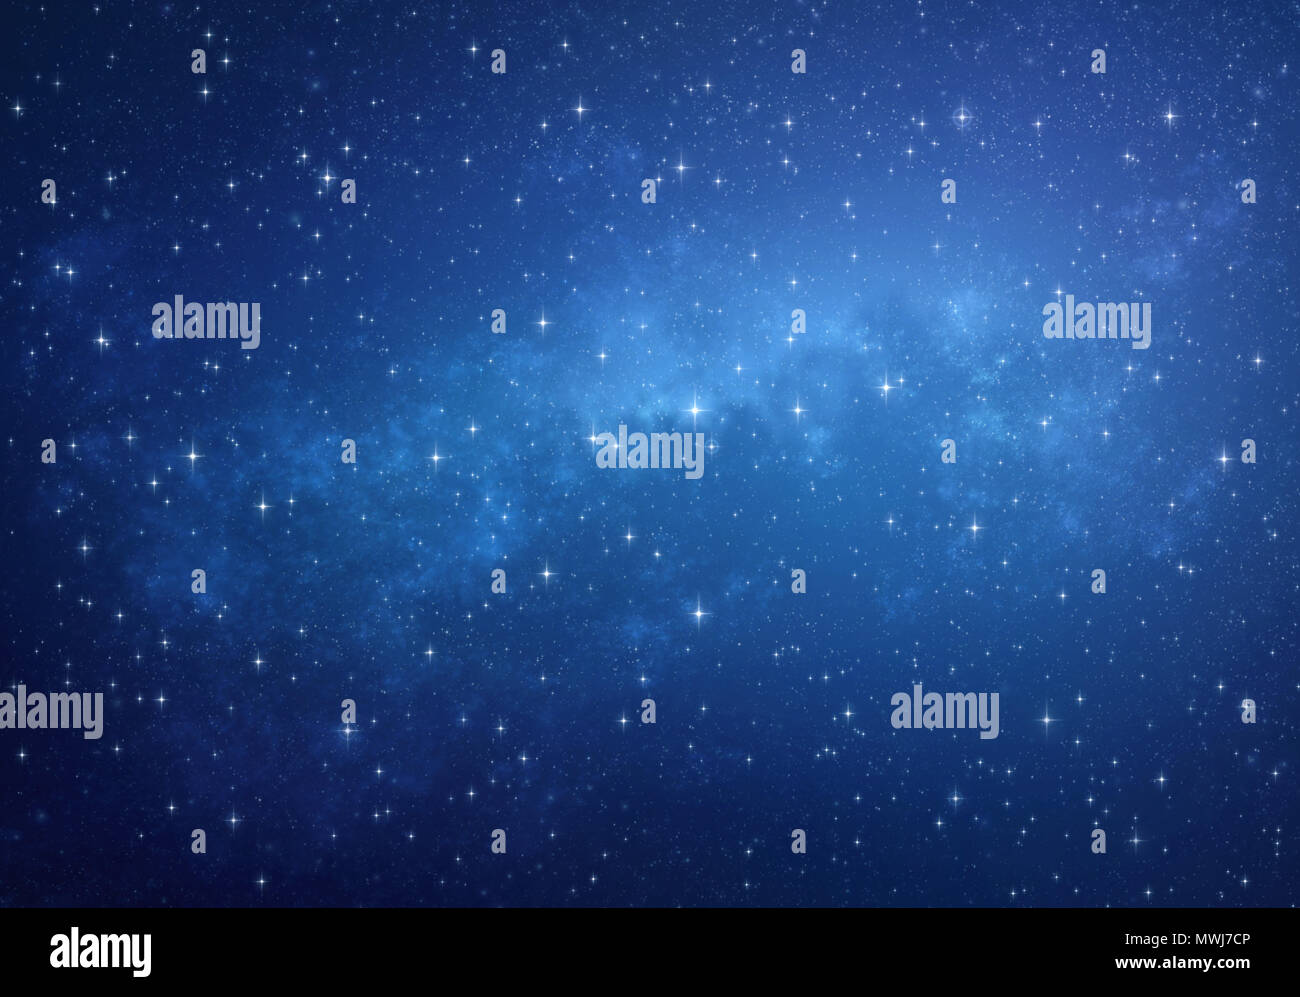 Deep space full of star clusters in high resolution. Shining stars in the sky at night. Stock Photo